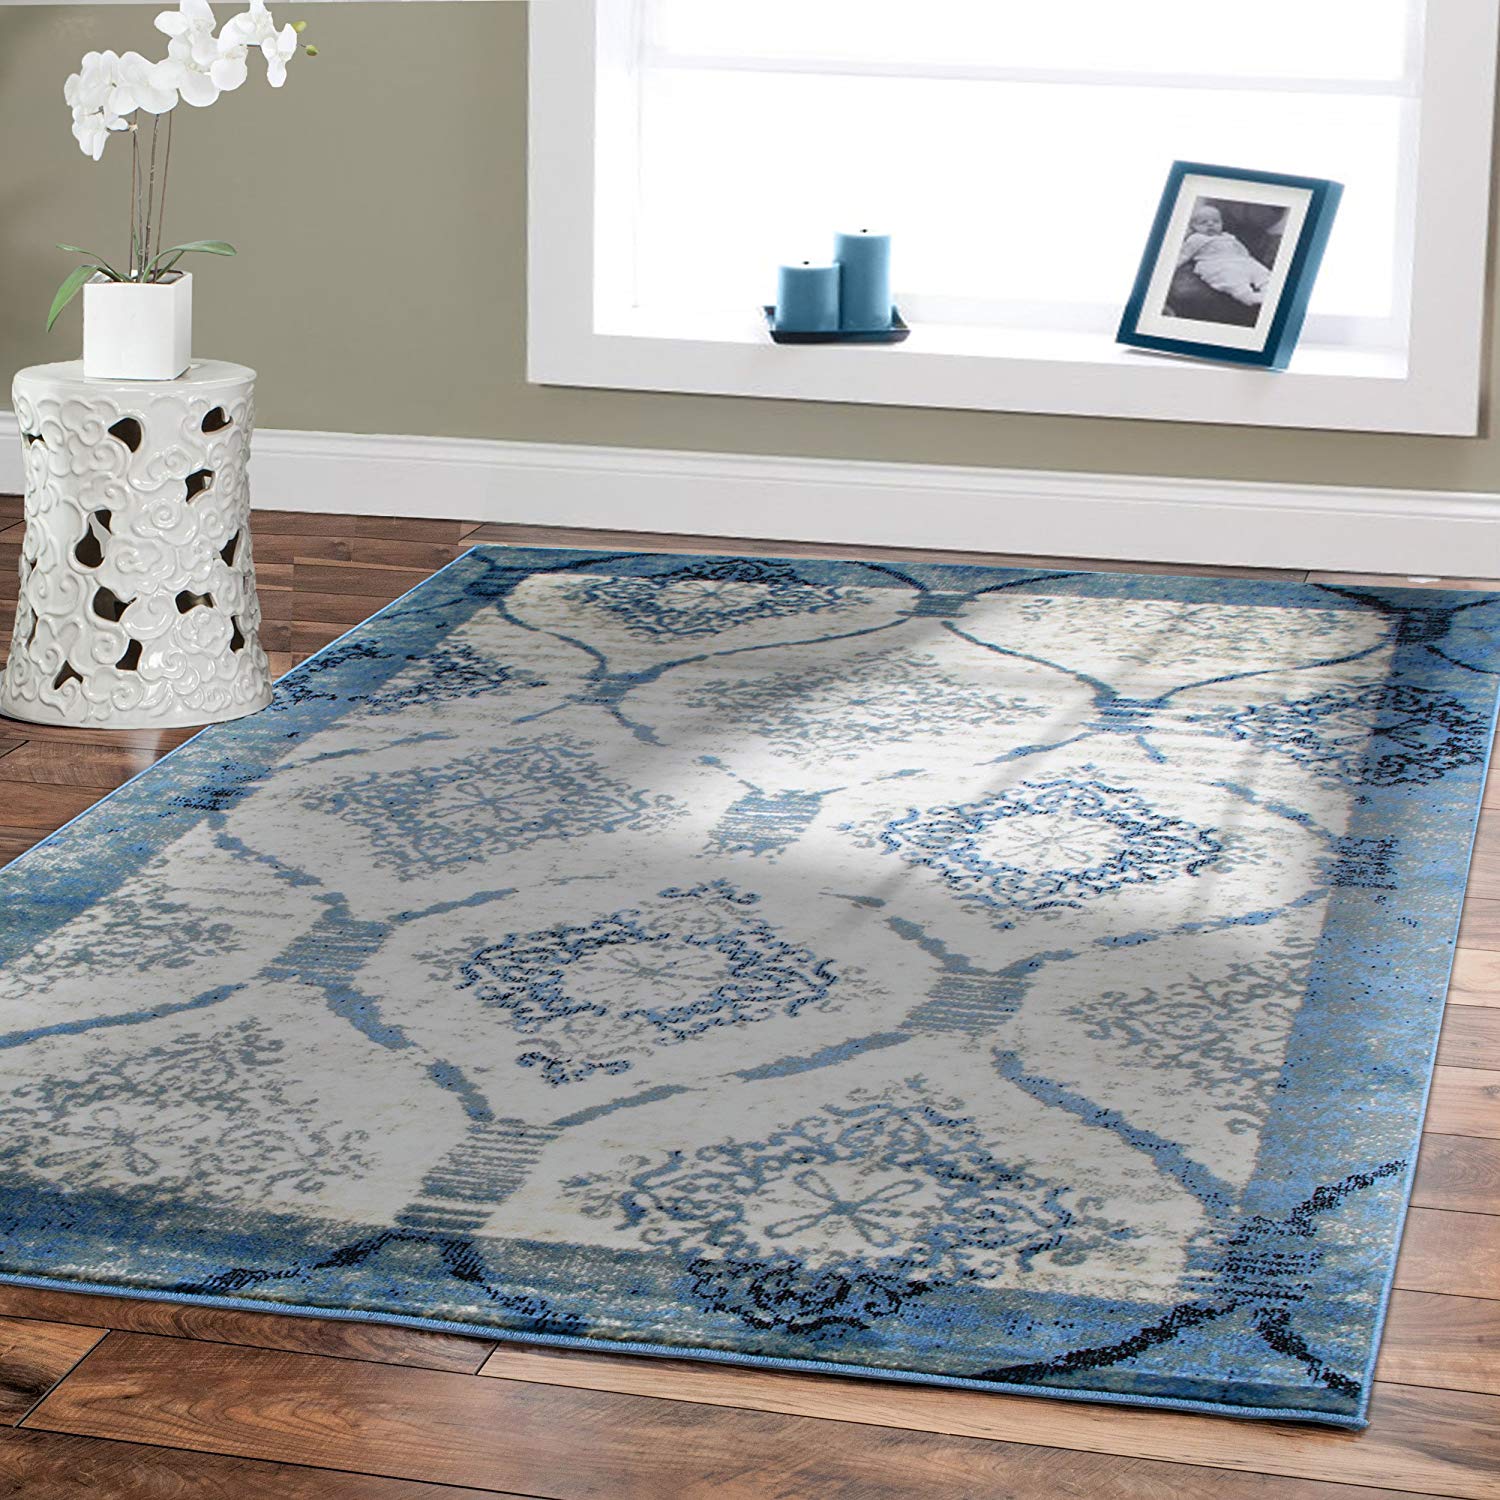 Important factors for choosing contemporary rugs